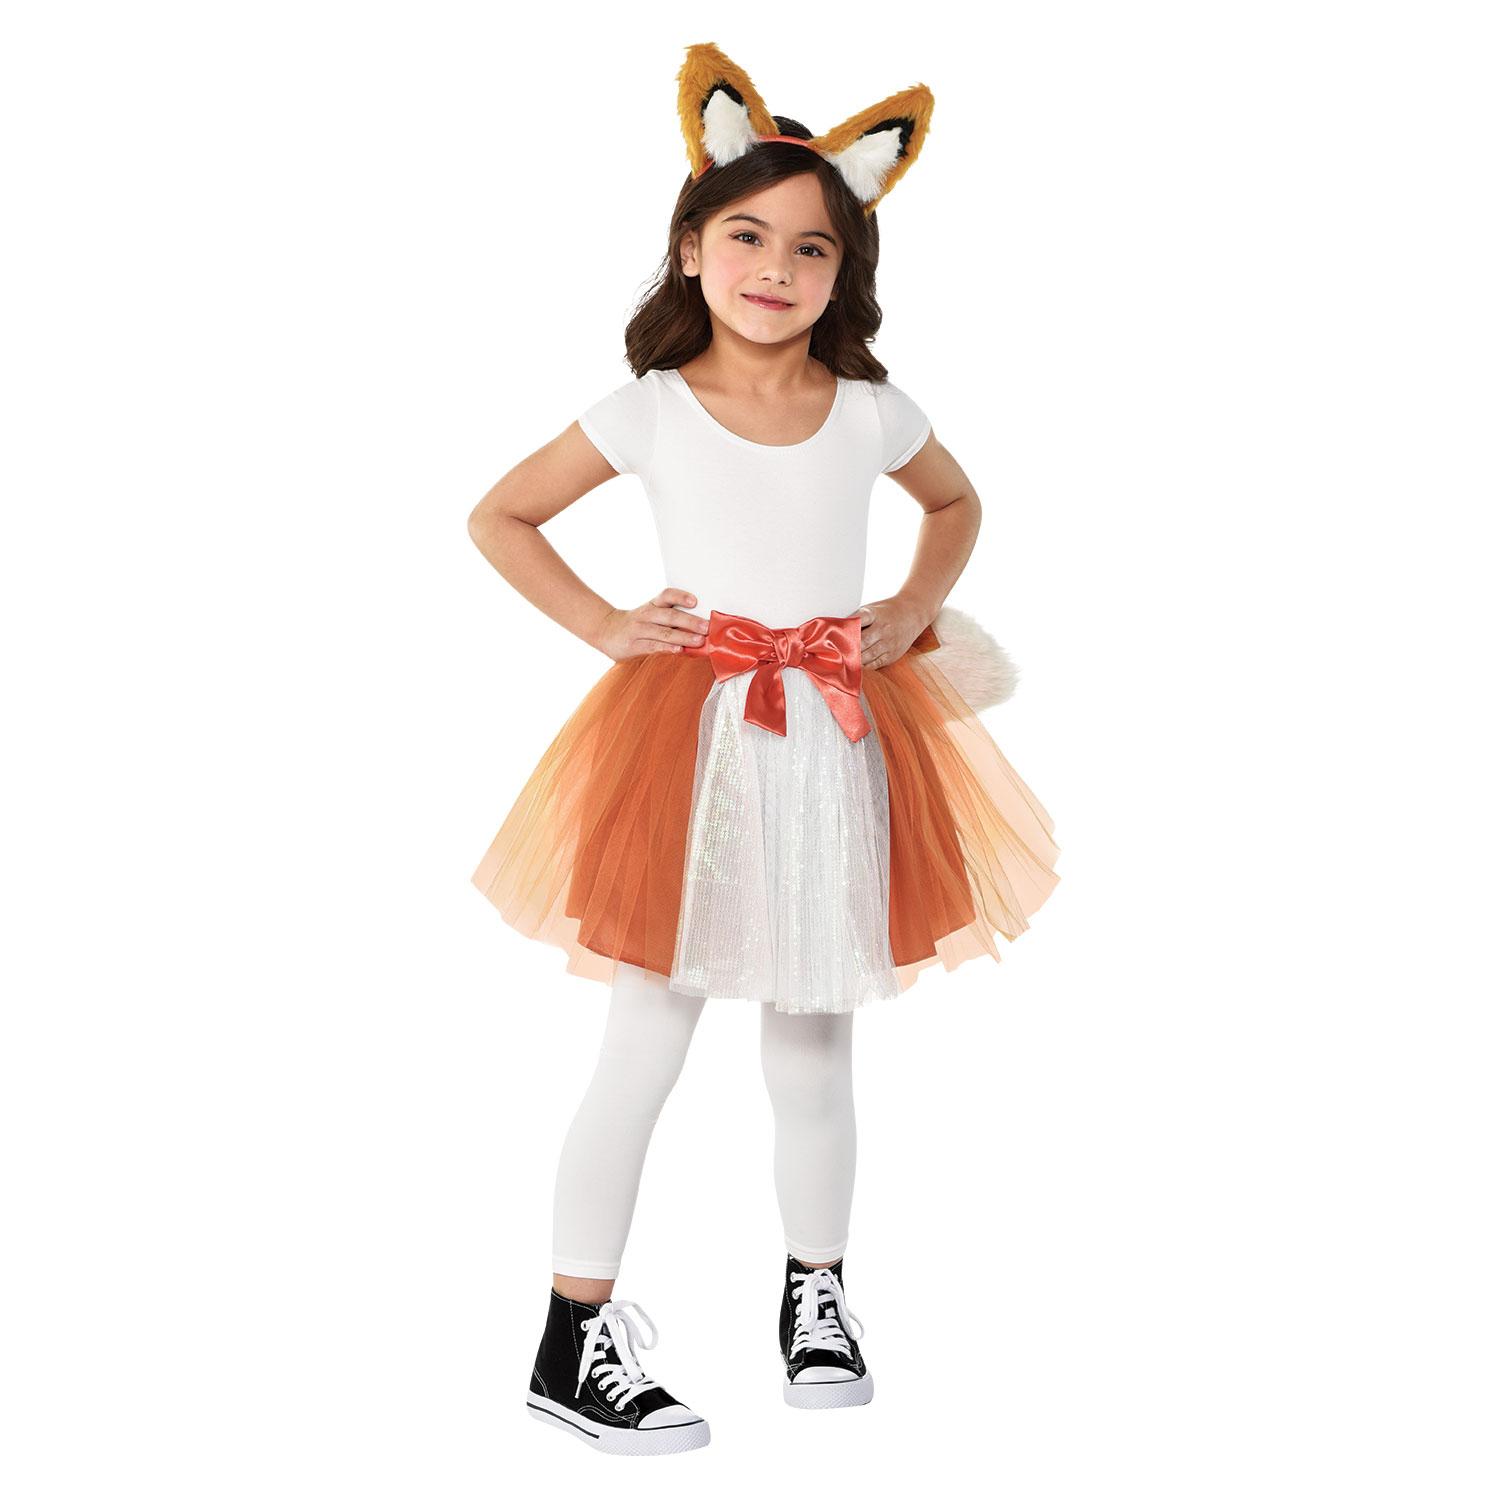 Fox Once Upon A Time Tutu Kit 4-6 Years Old Costumes & Apparel - Party Centre